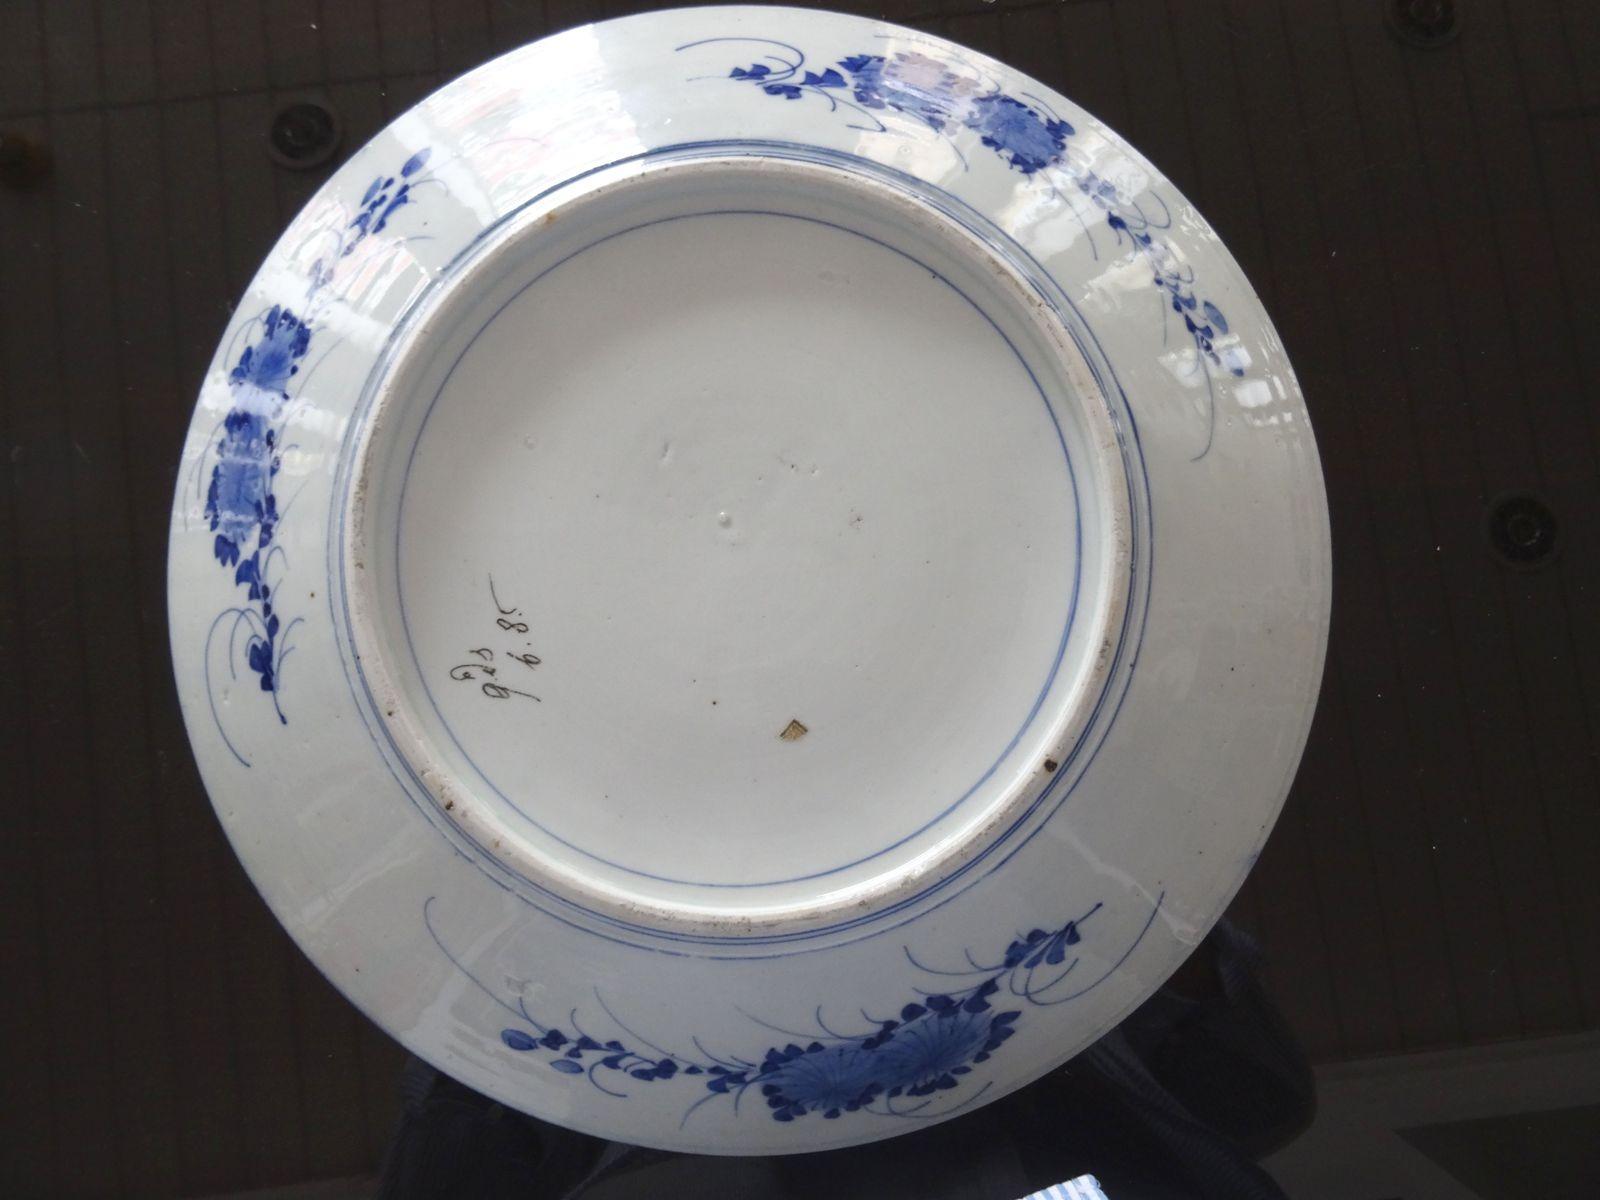 Large Antique Japanese Blue & White Porcelain Plate, 19th century - Other Art Style Art by Unknown